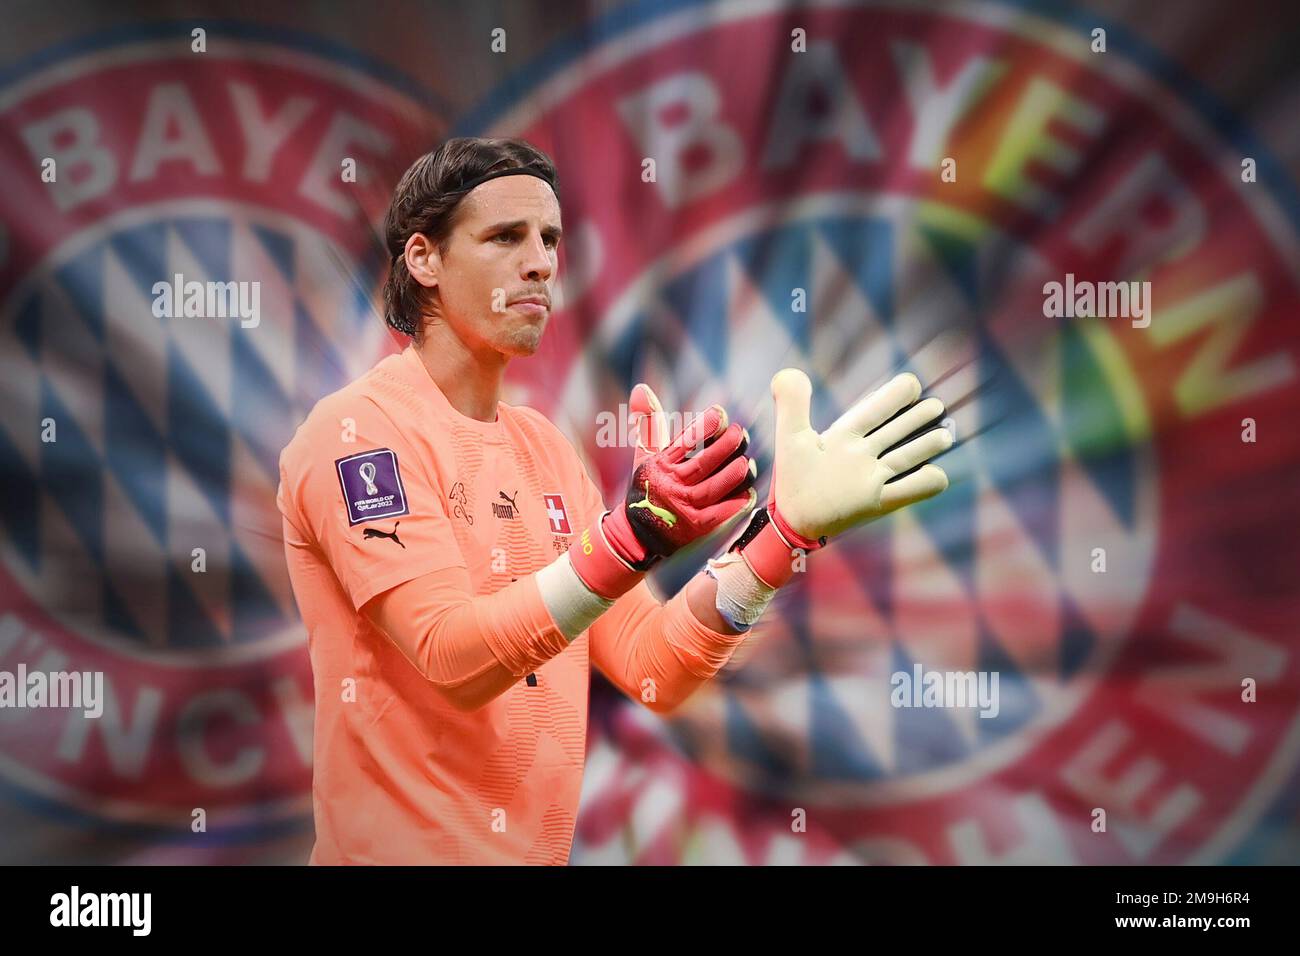 PHOTO MONTAGE: FC Bayern Munich: Yann Sommer moves to the Isar. ARCHIVE PHOTO; Yann SOMMER, goalwart (SUI), gesture, gives instructions, action, single image, cut single motif, half figure, half figure. Round of 16, Round of Sixteen, Game 56, Portugal (POR) - Switzerland (SUI) 6-1 on December 6th, 2022, Lusail Stadium Football World Cup 20122 in Qatar from November 20th. - 18.12.2022 Ã?Â Stock Photo